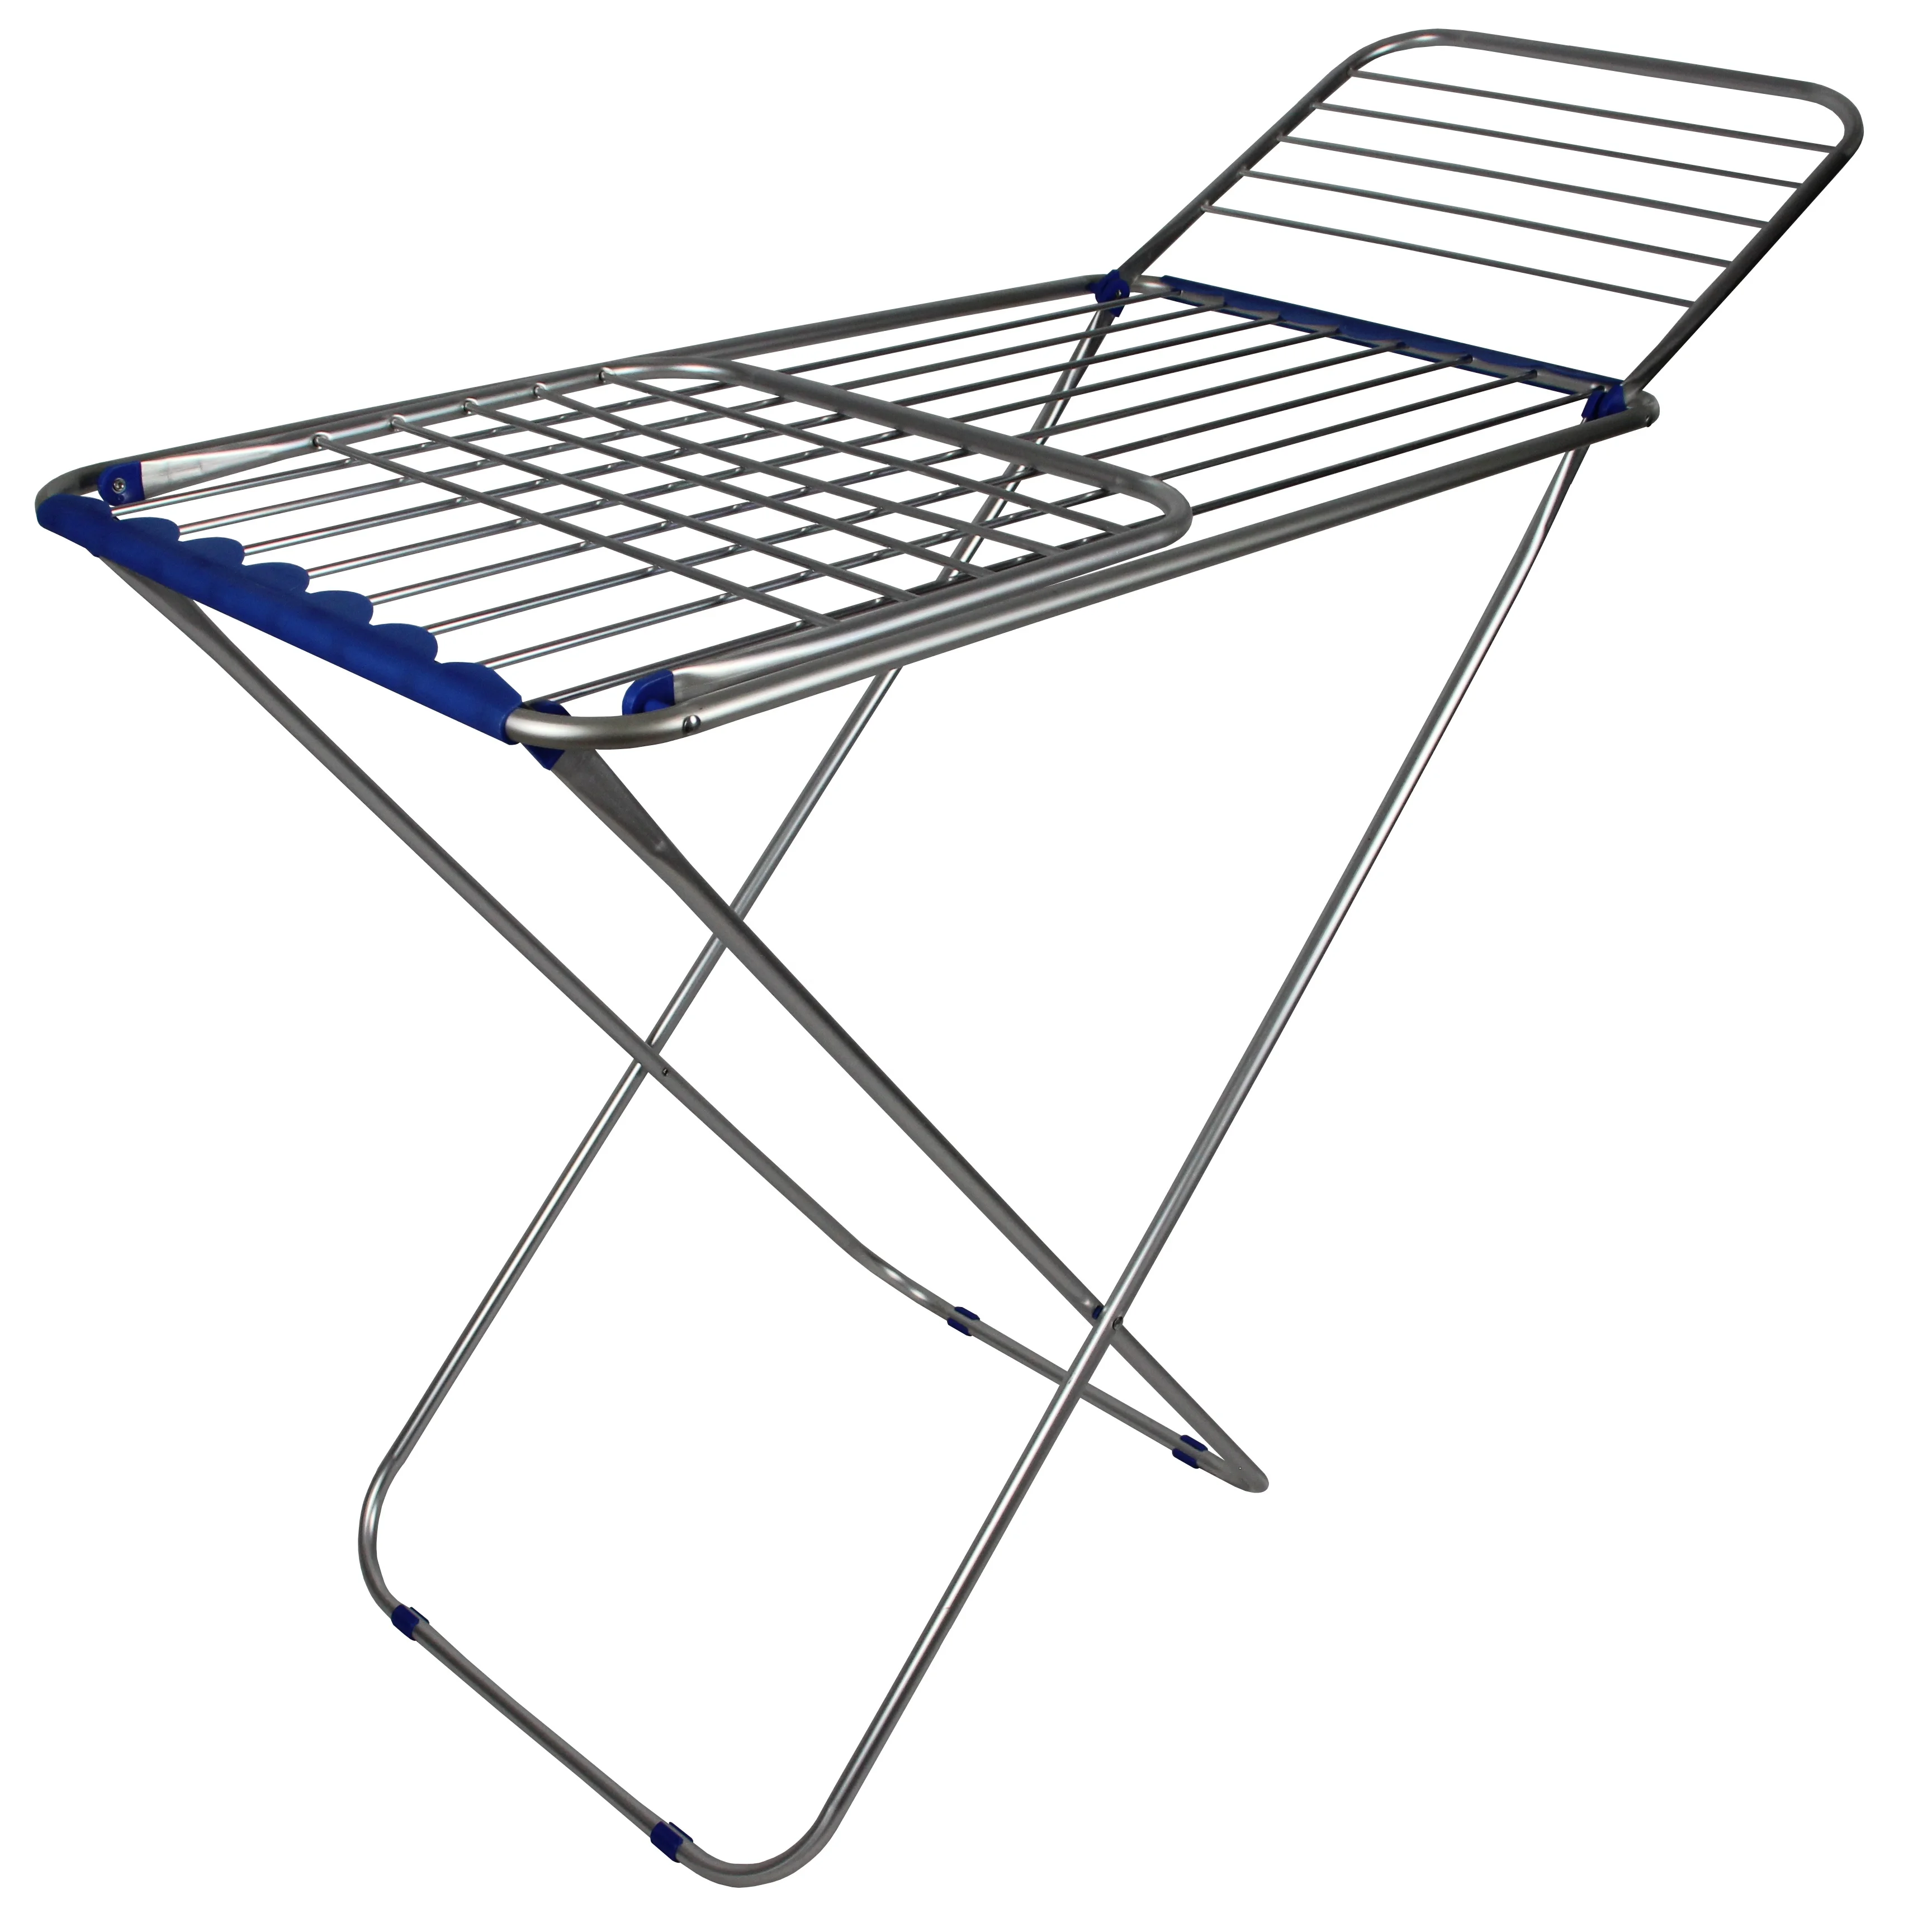 OEM/ODM Aluminum Alloy folding clothes hanger,18M,Mobile clothes drying rack,Shelf suitable for outdoor balcony lawn